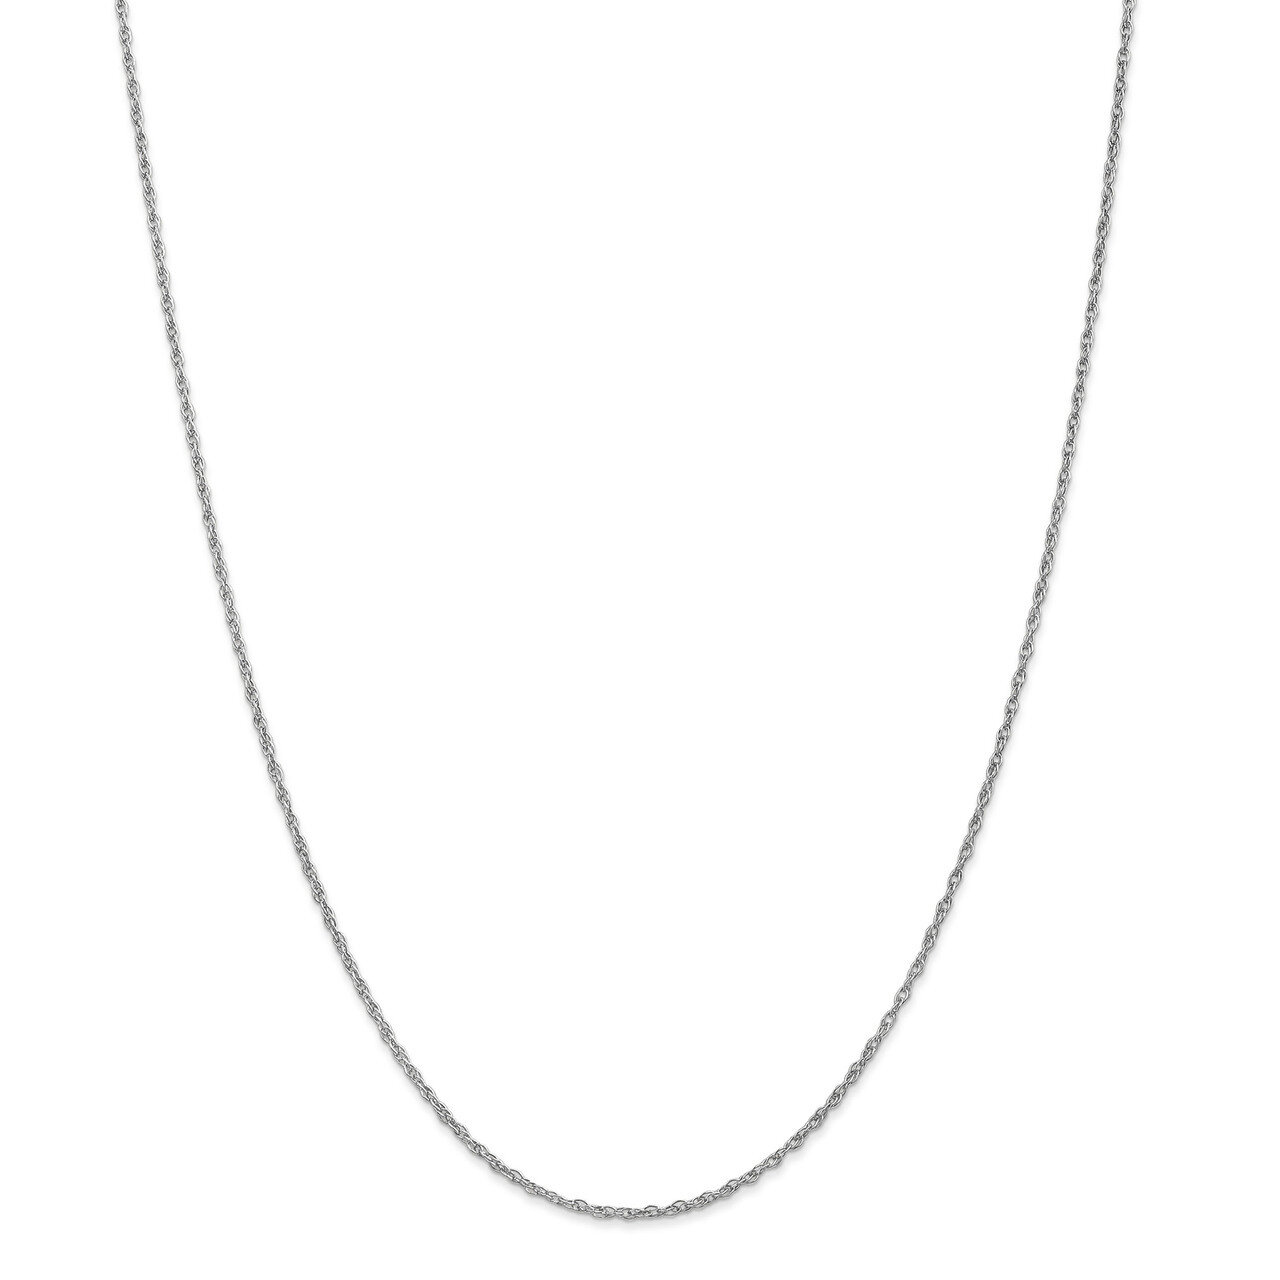 1.5 mm Pendant Rope Chain 20 Inch 14K White Gold HB-7157-20